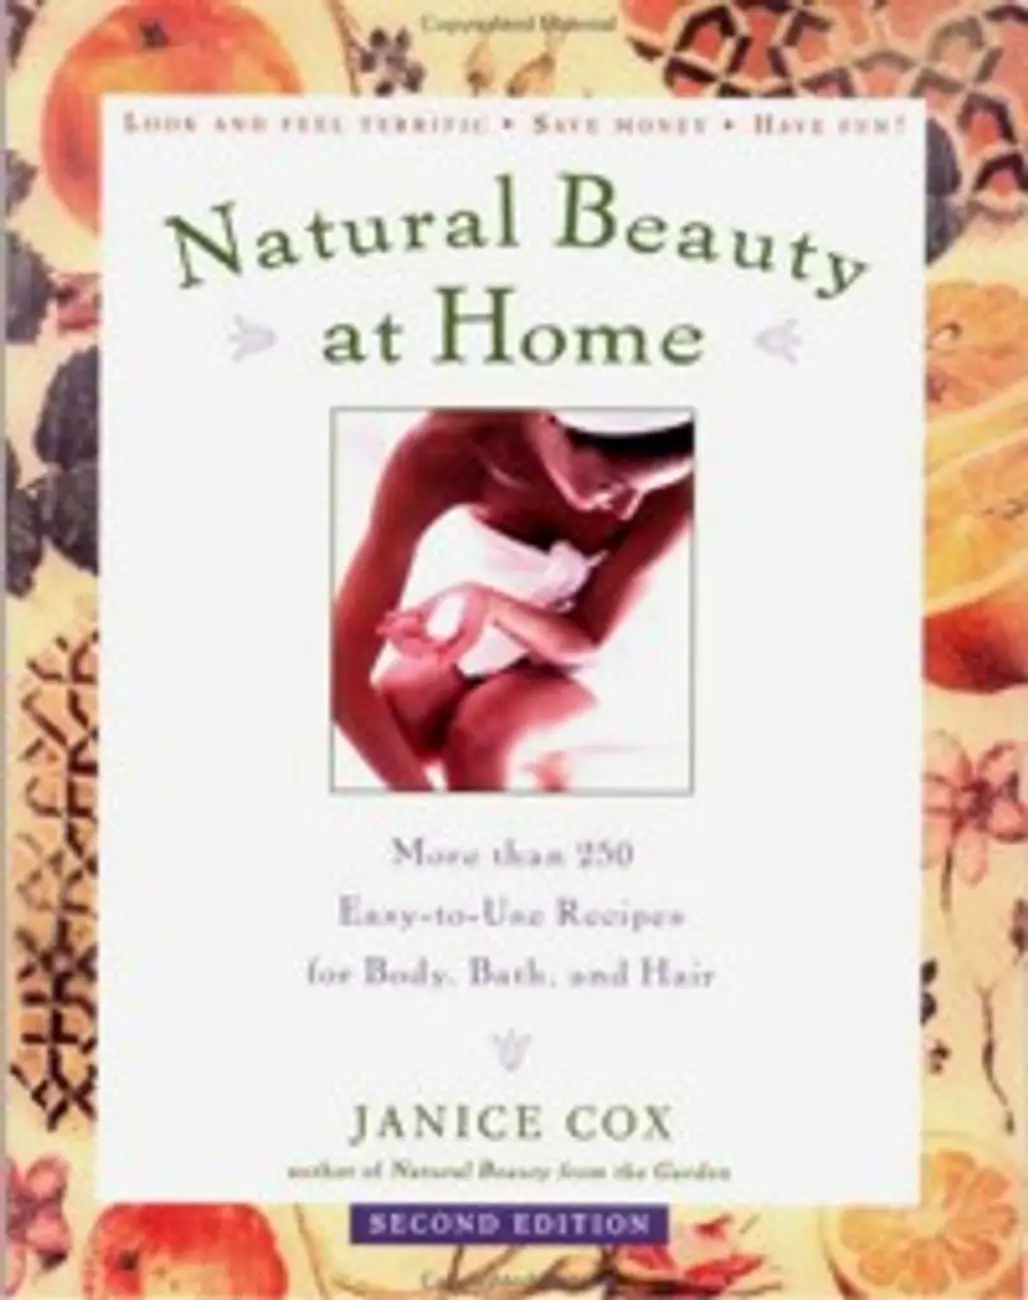 Natural Beauty at Home: More than 250 Easy-to-Use Recipes for Body, Bath, and Hair by Janice Cox